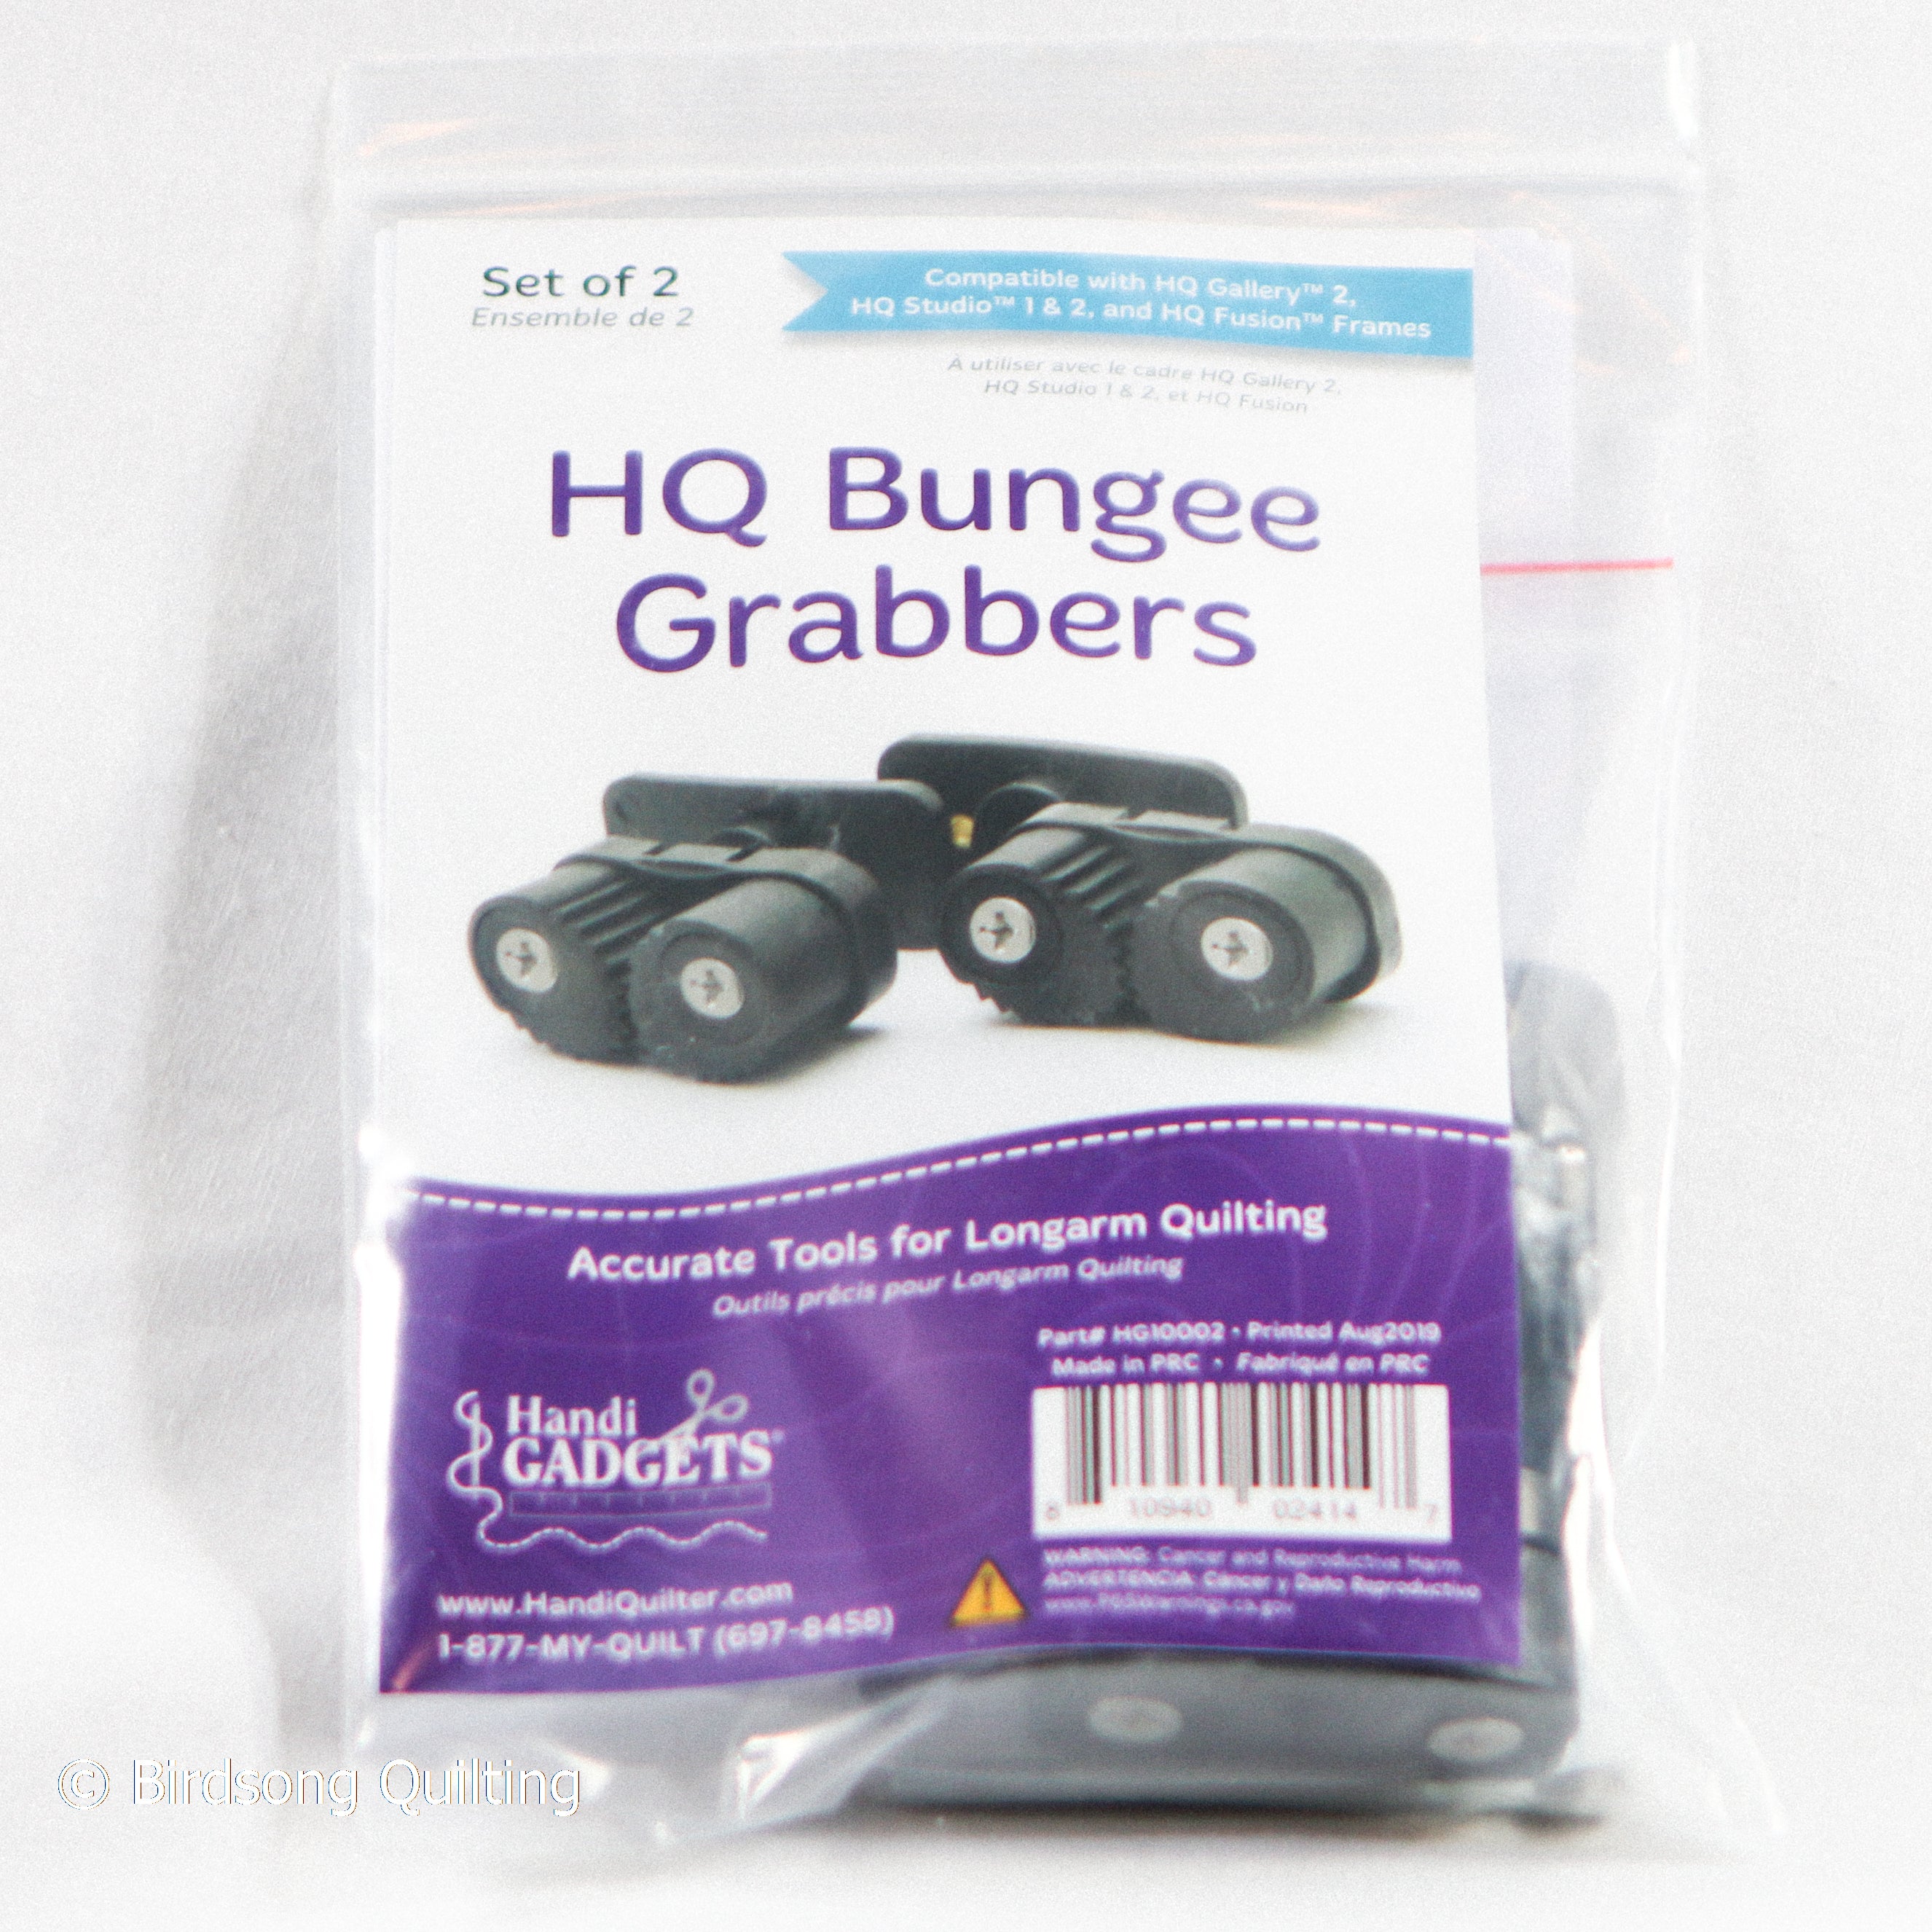 HQ Bungee Grabbers